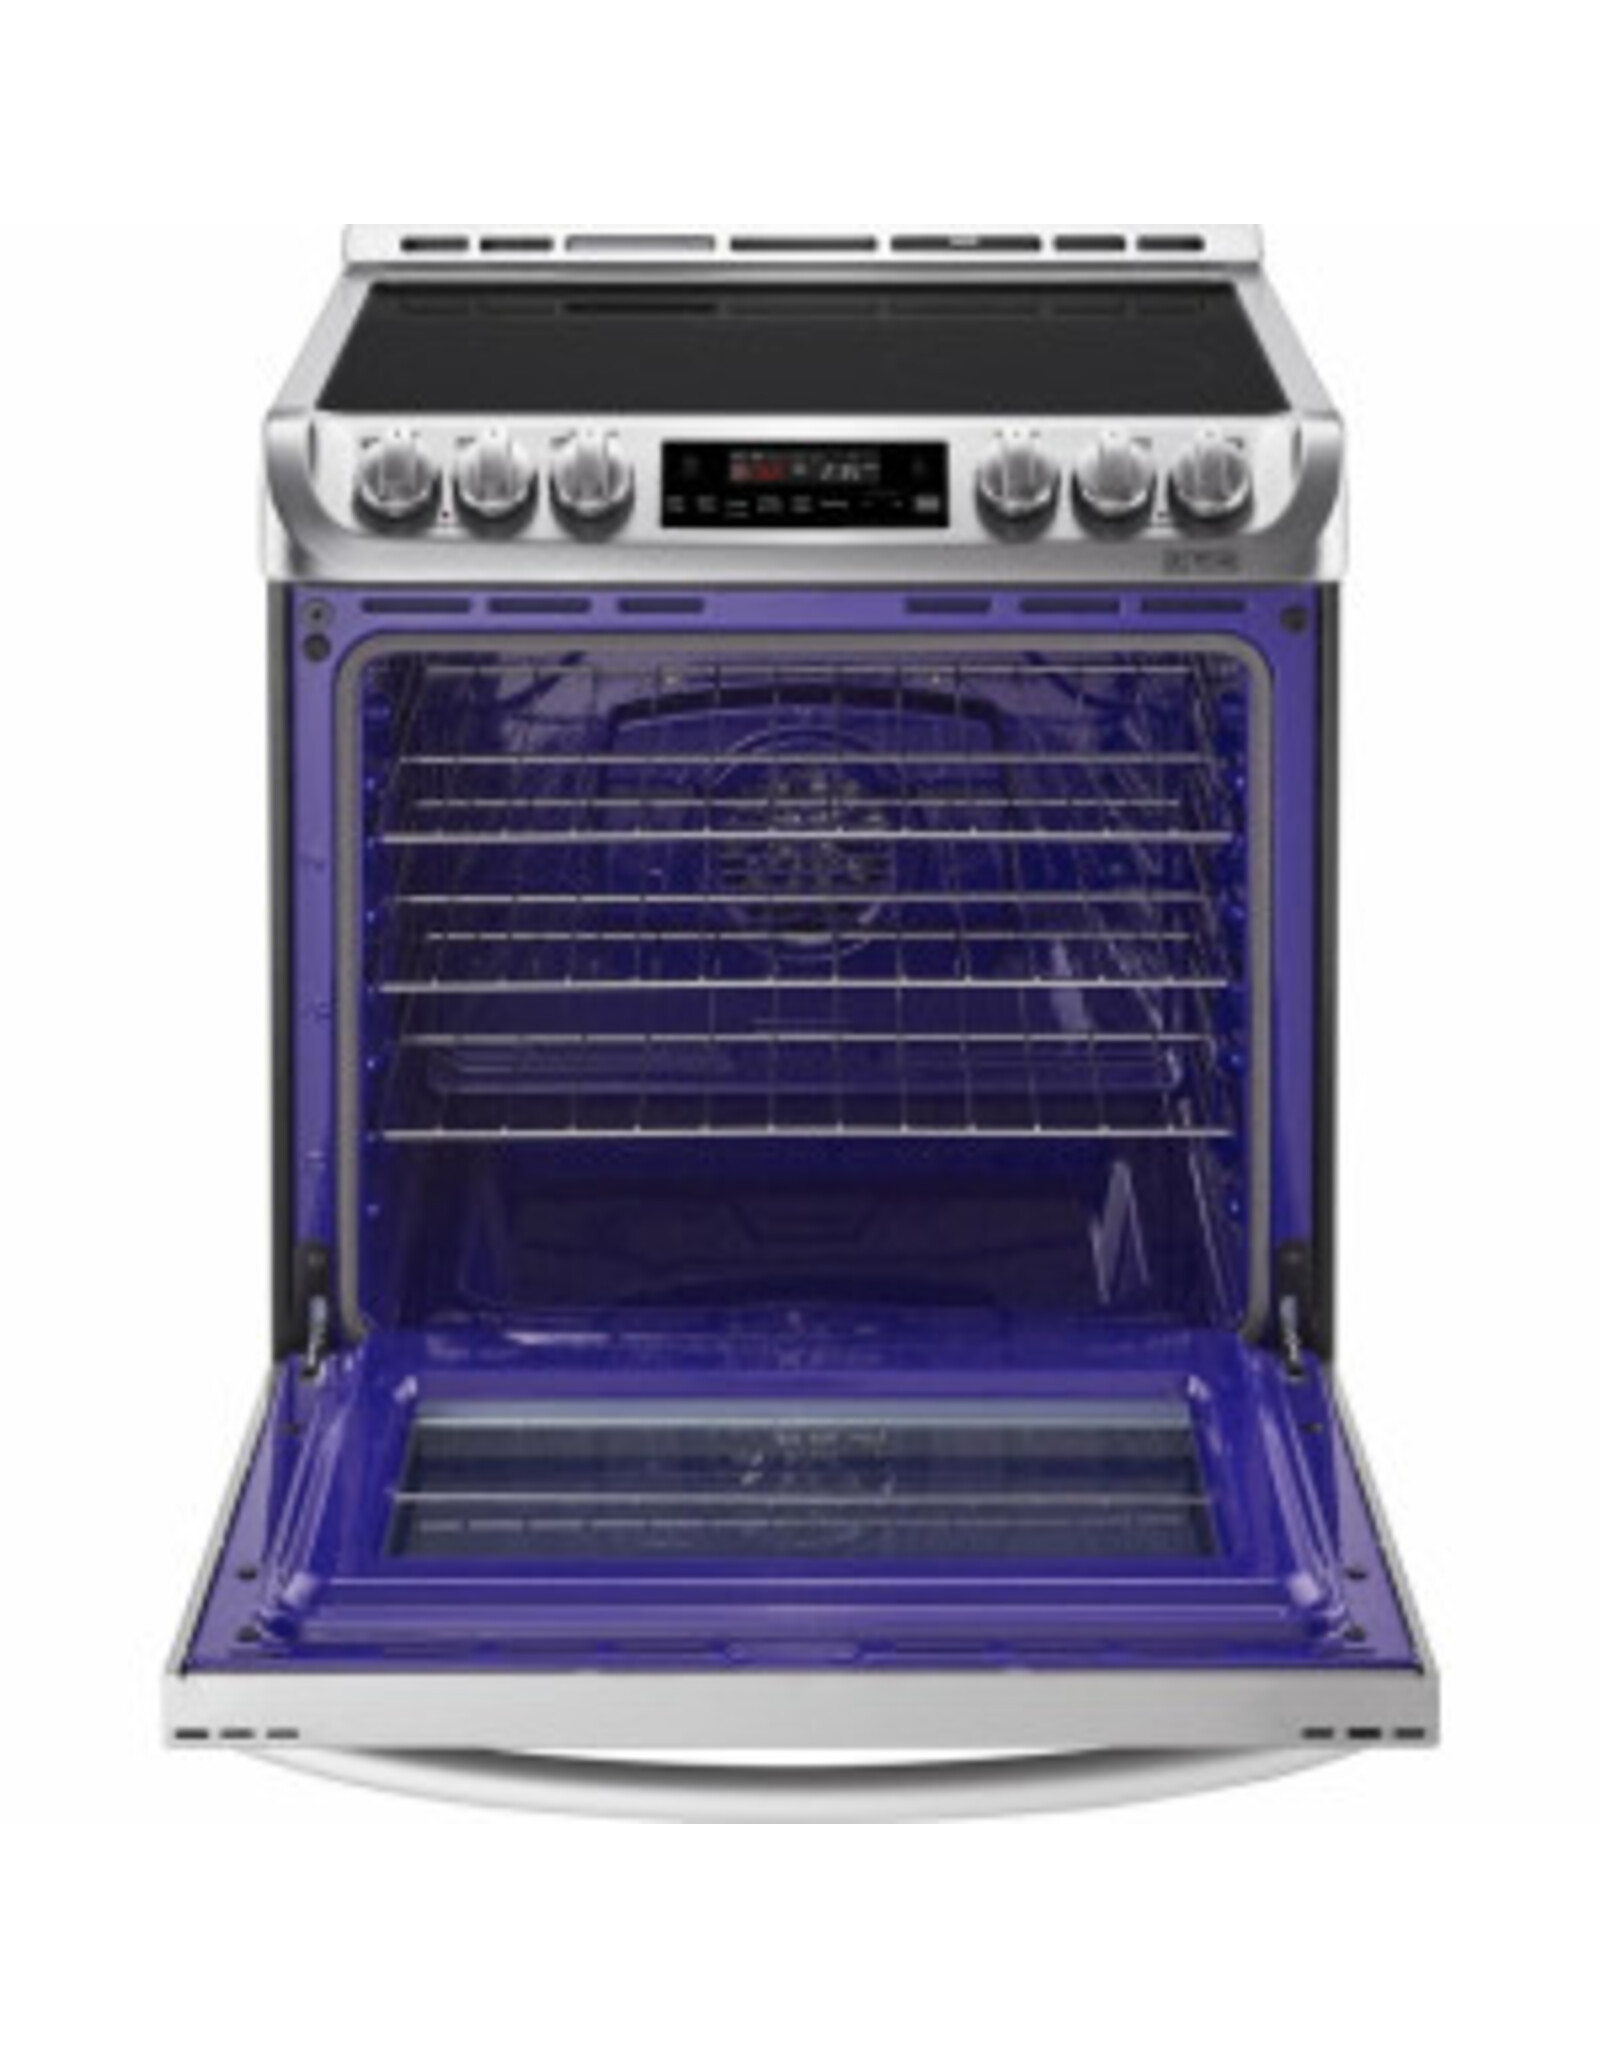 LG Electronics LG  6.3 cu. ft. Slide-In Electric Range with ProBake Convection Oven and EasyClean in Stainless Steel